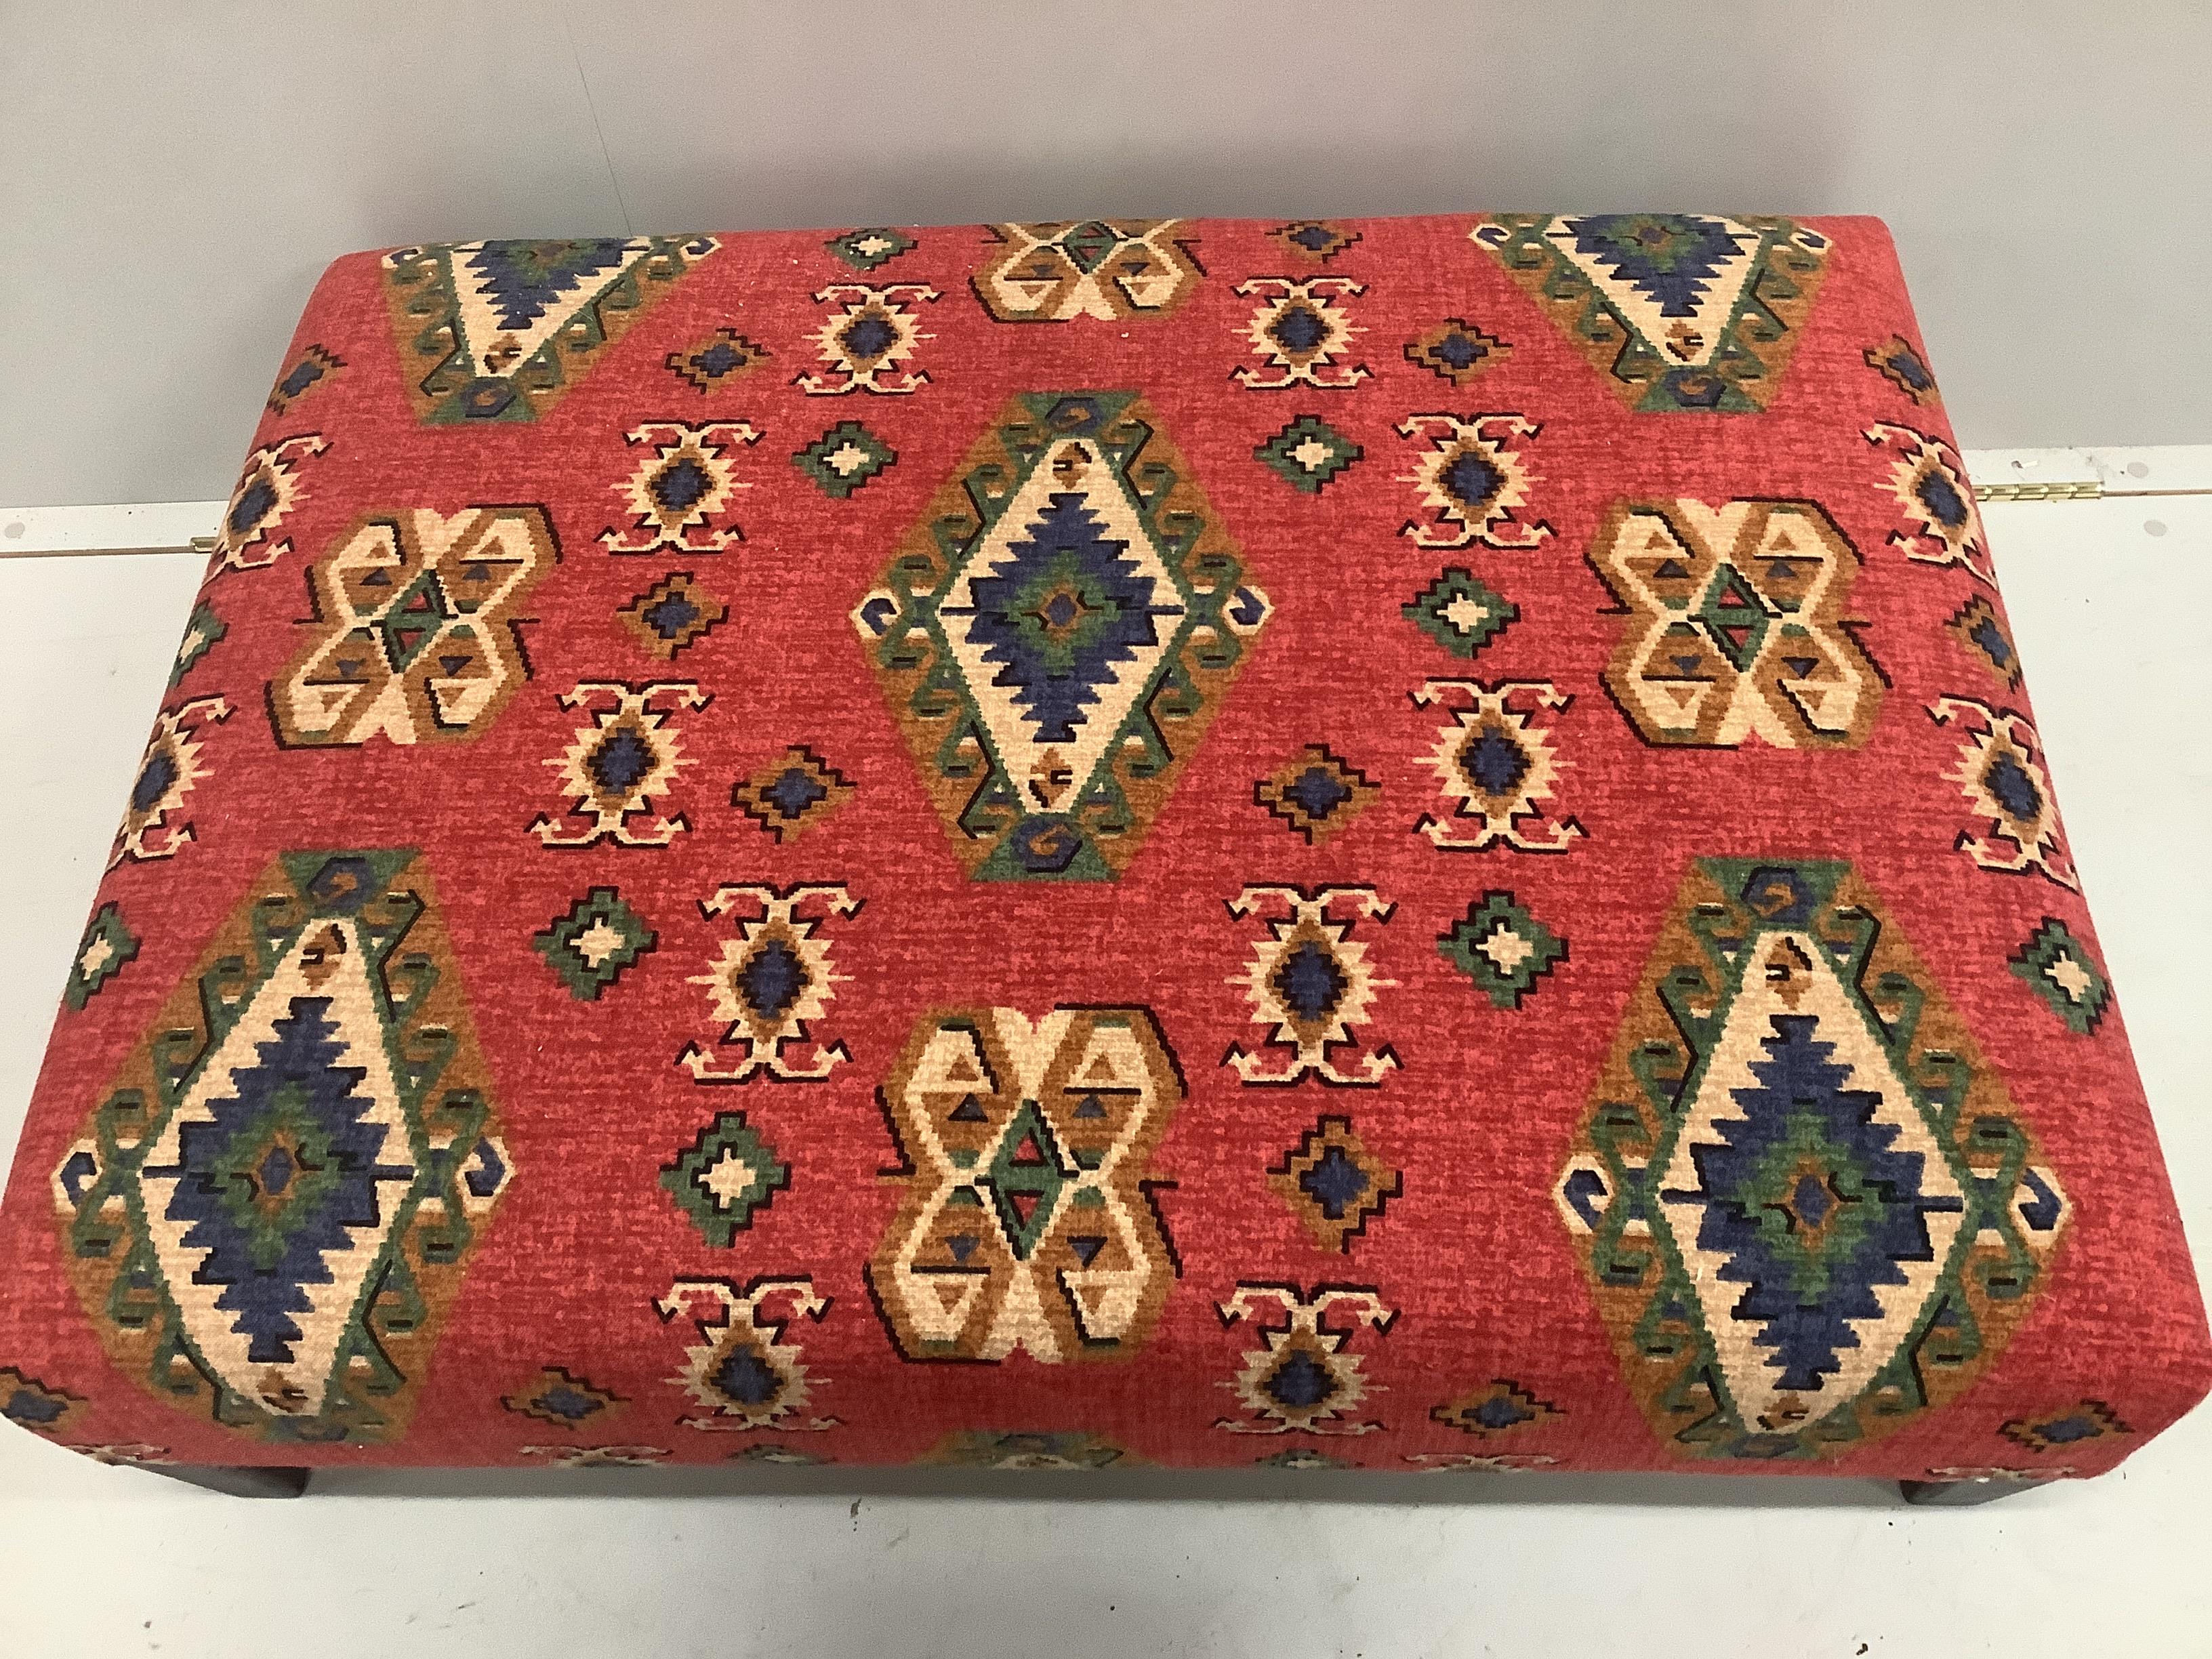 A contemporary rectangular footstool with Kilim style fabric upholstery, width 102cm, depth 74cm, height 28cm